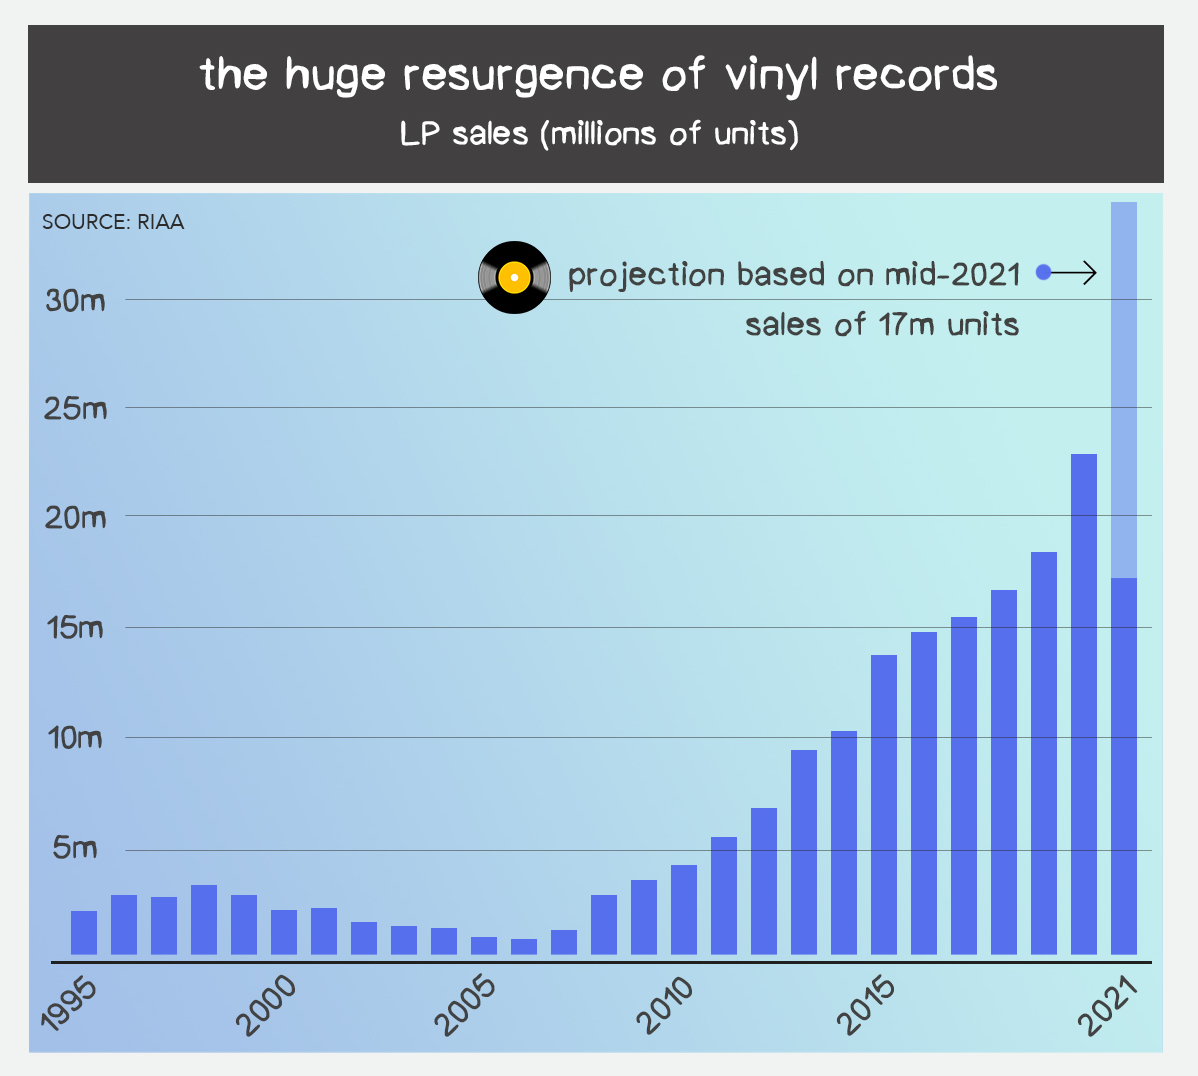 Bar chart titled The Huge Resurgence of Vinyl Records; vinyl records projected to break 30m units (LPs) sold in 2021